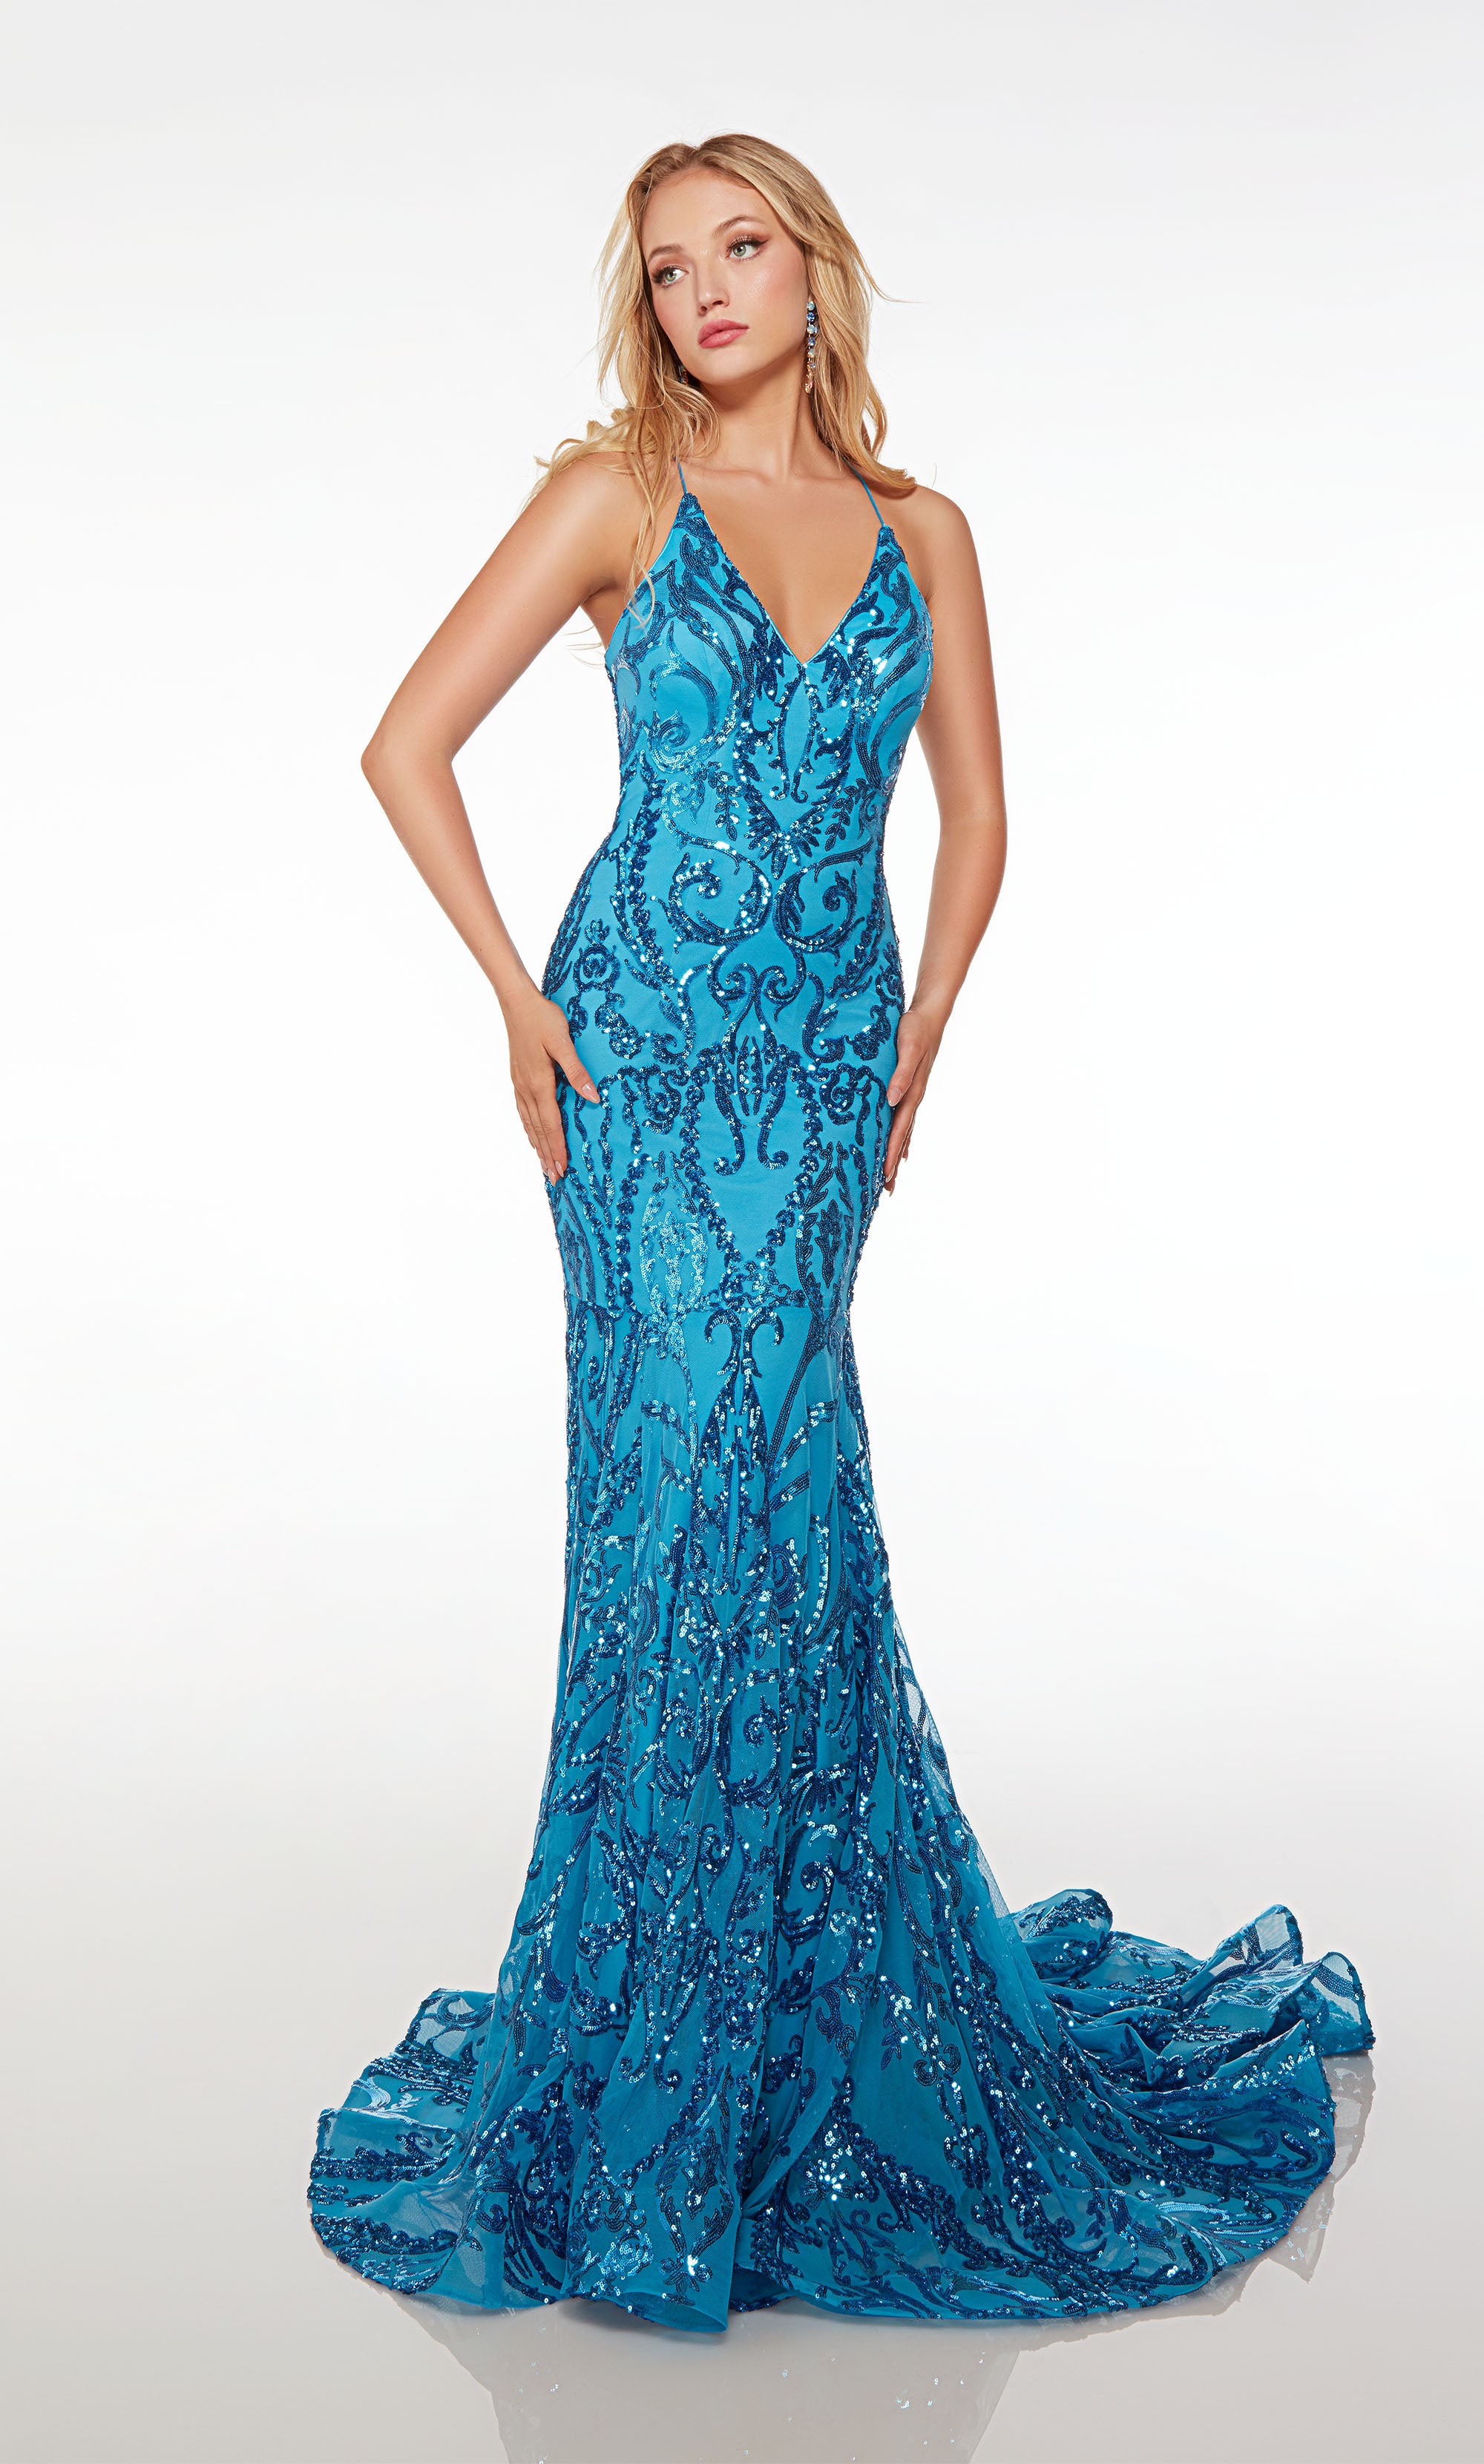 Glamorous fit-and-flare prom dress in blue paisley sequin fabric, showcasing an captivating V-neckline and an stylish strappy back.